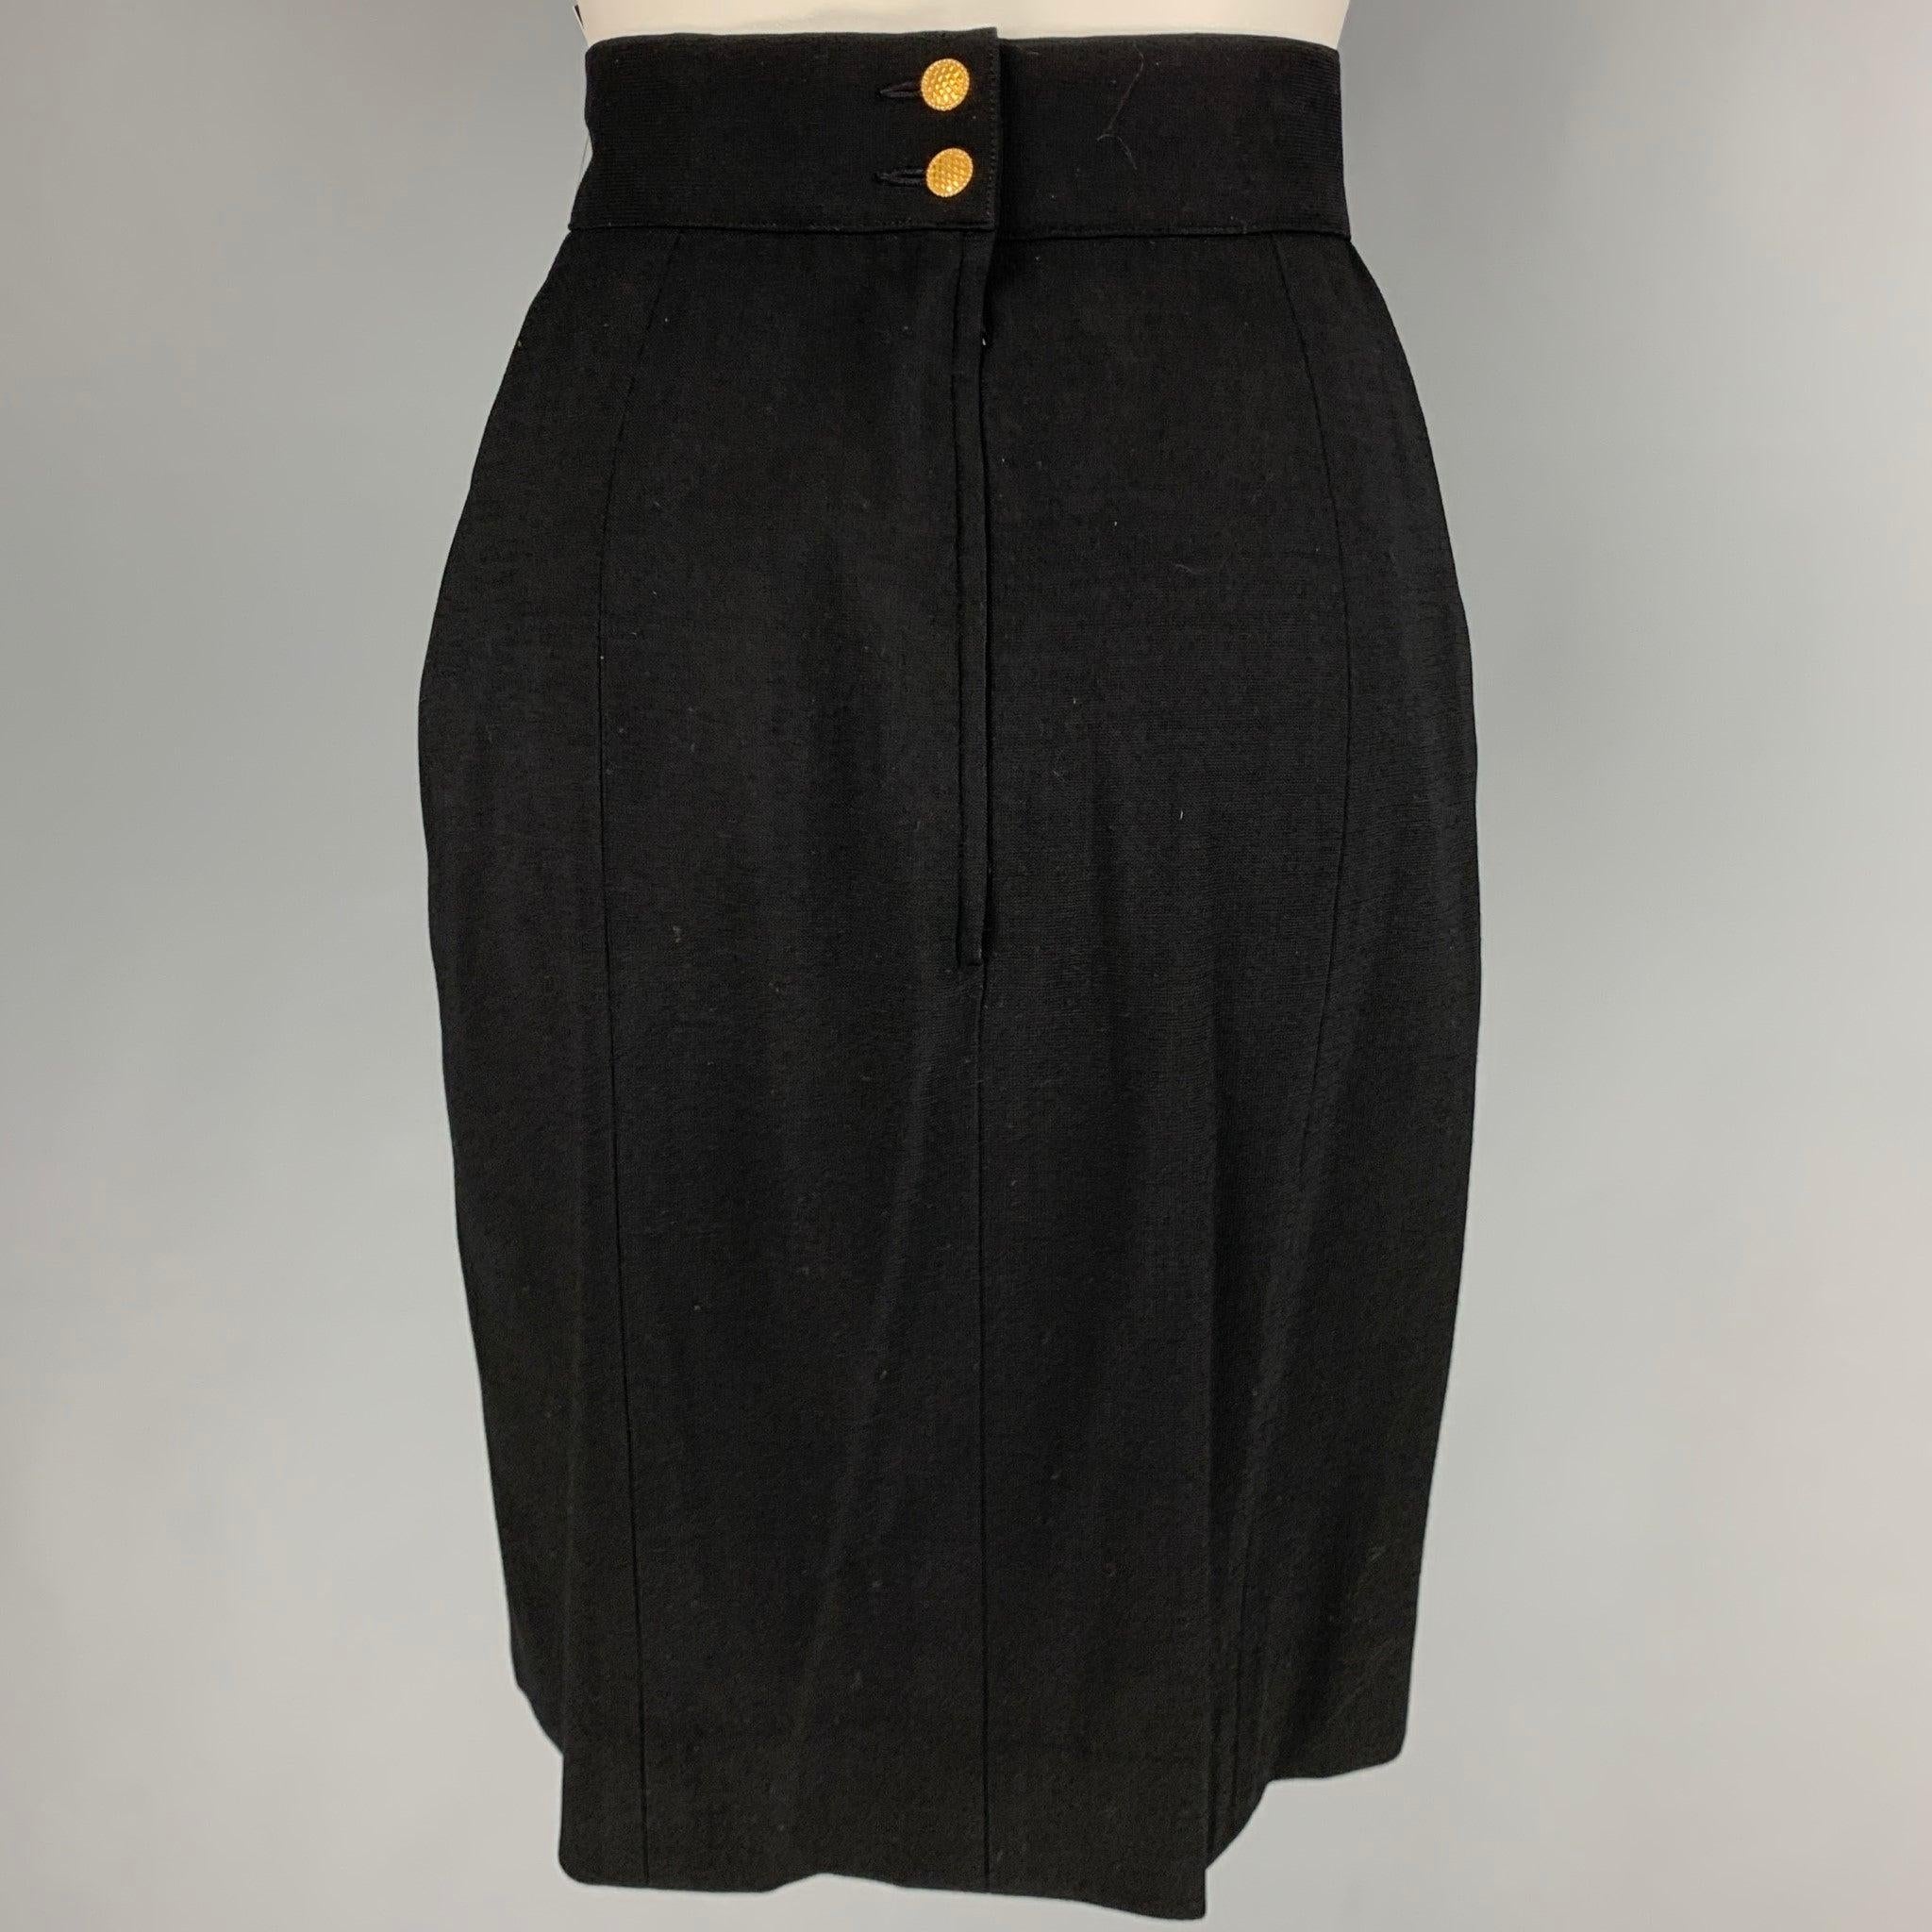 CHANEL skirt
in a black wool blend fabric featuring a below knee length, and back zipper closure with Chanel gold tone buttons. Made in France.Very Good Pre-Owned Condition. Minor signs of wear. 

Marked:   40 

Measurements: 
  Waist: 28 inches